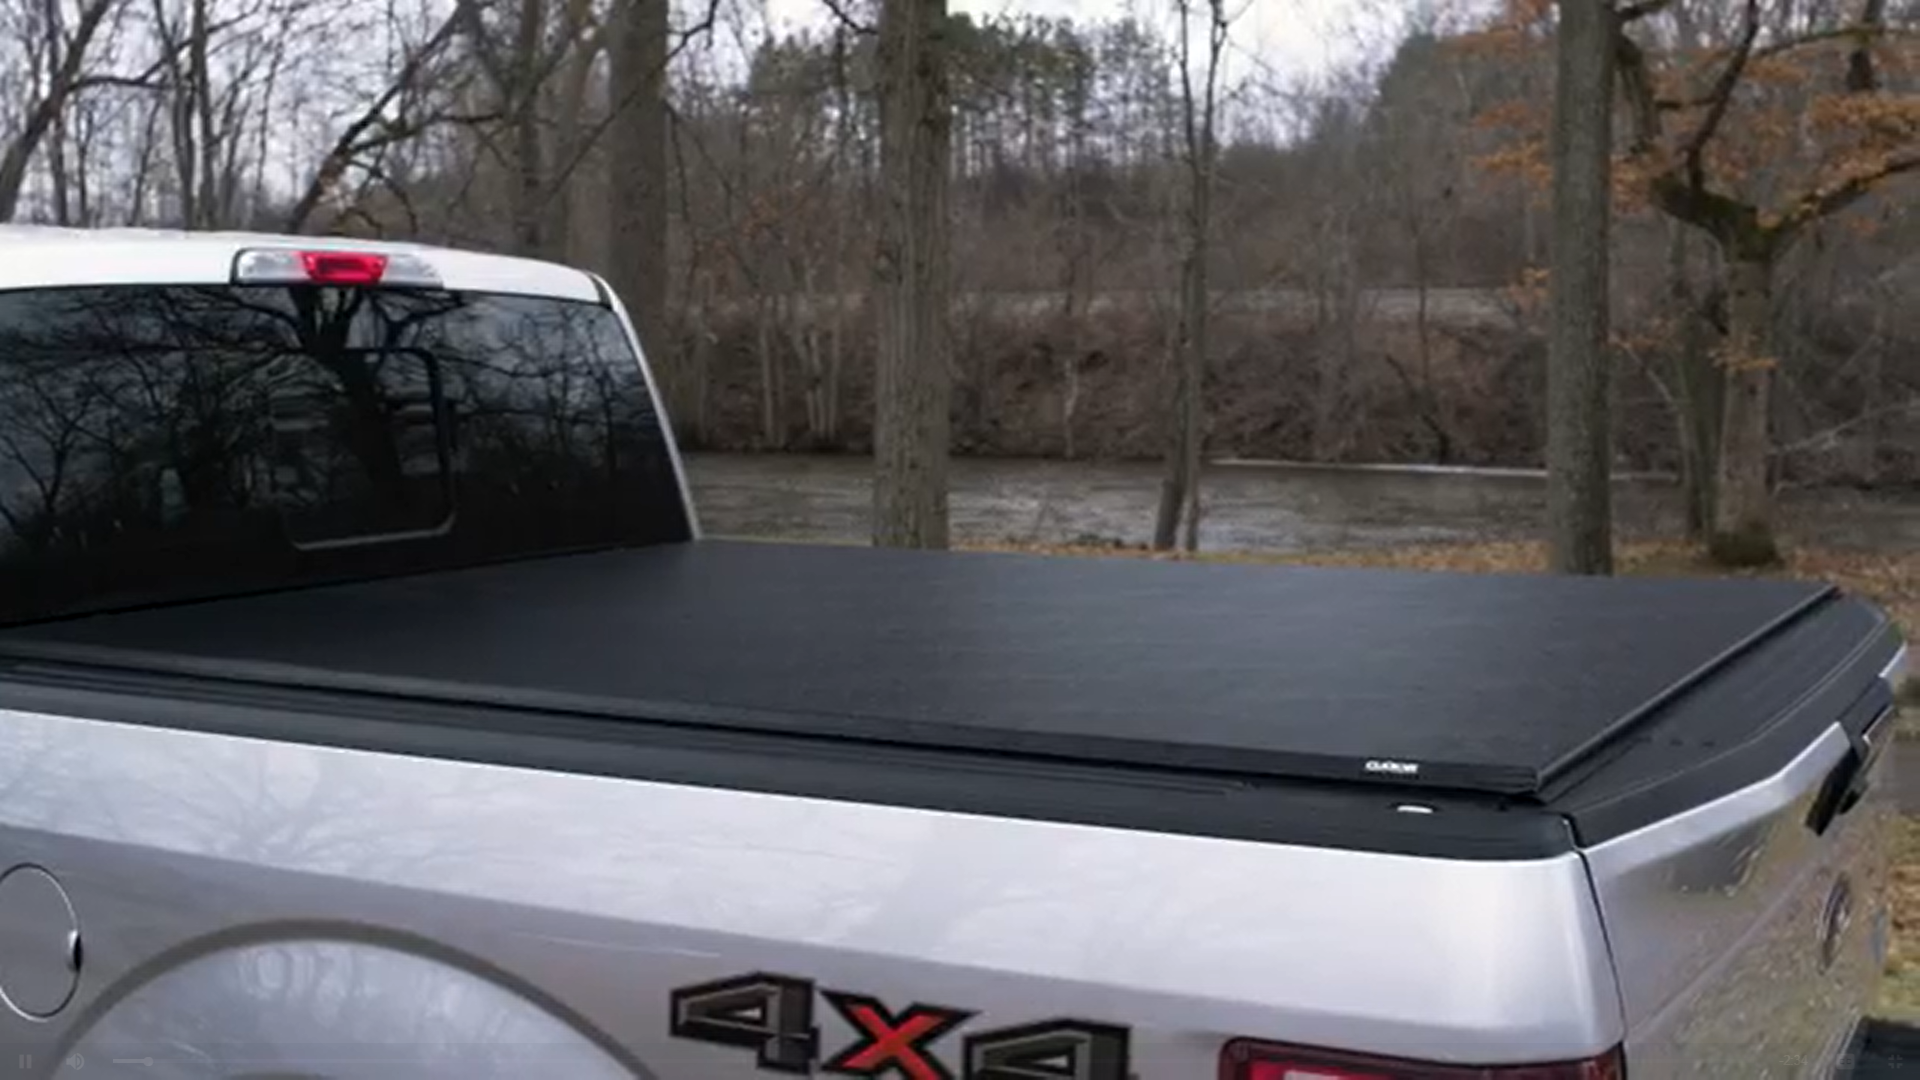 How to Open Tonneau Cover When the Tailgate Won't Open